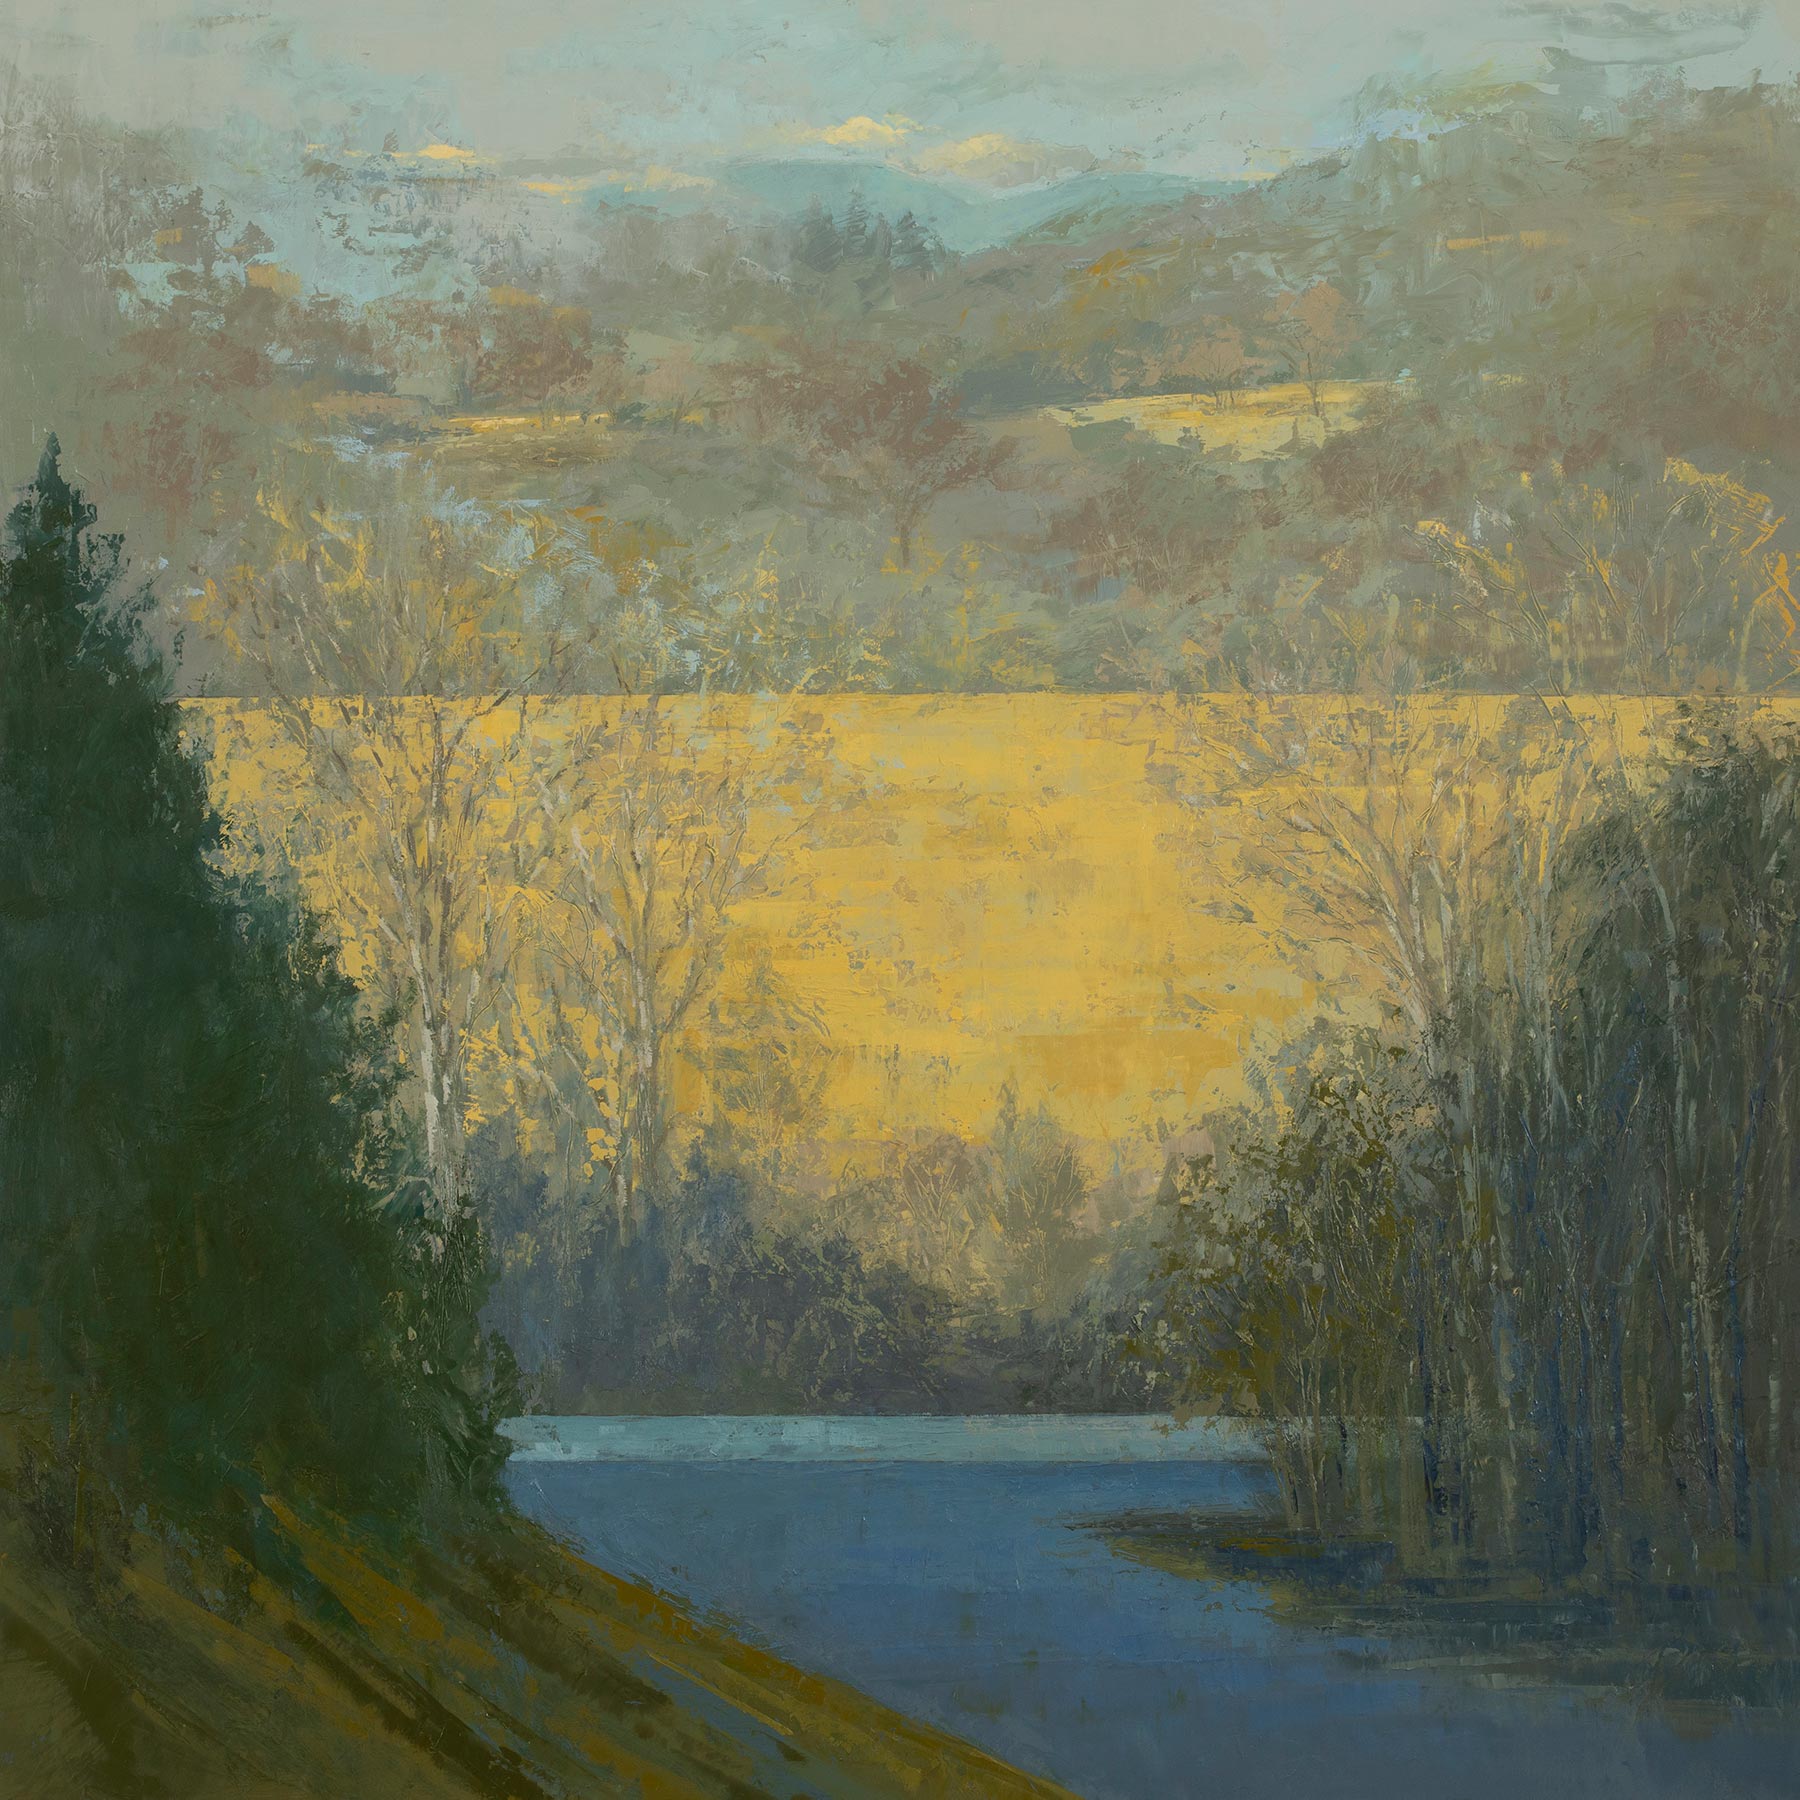 View from the Ridge: Silver and Gold, oil on panel, 30 x 30 inches, 2020